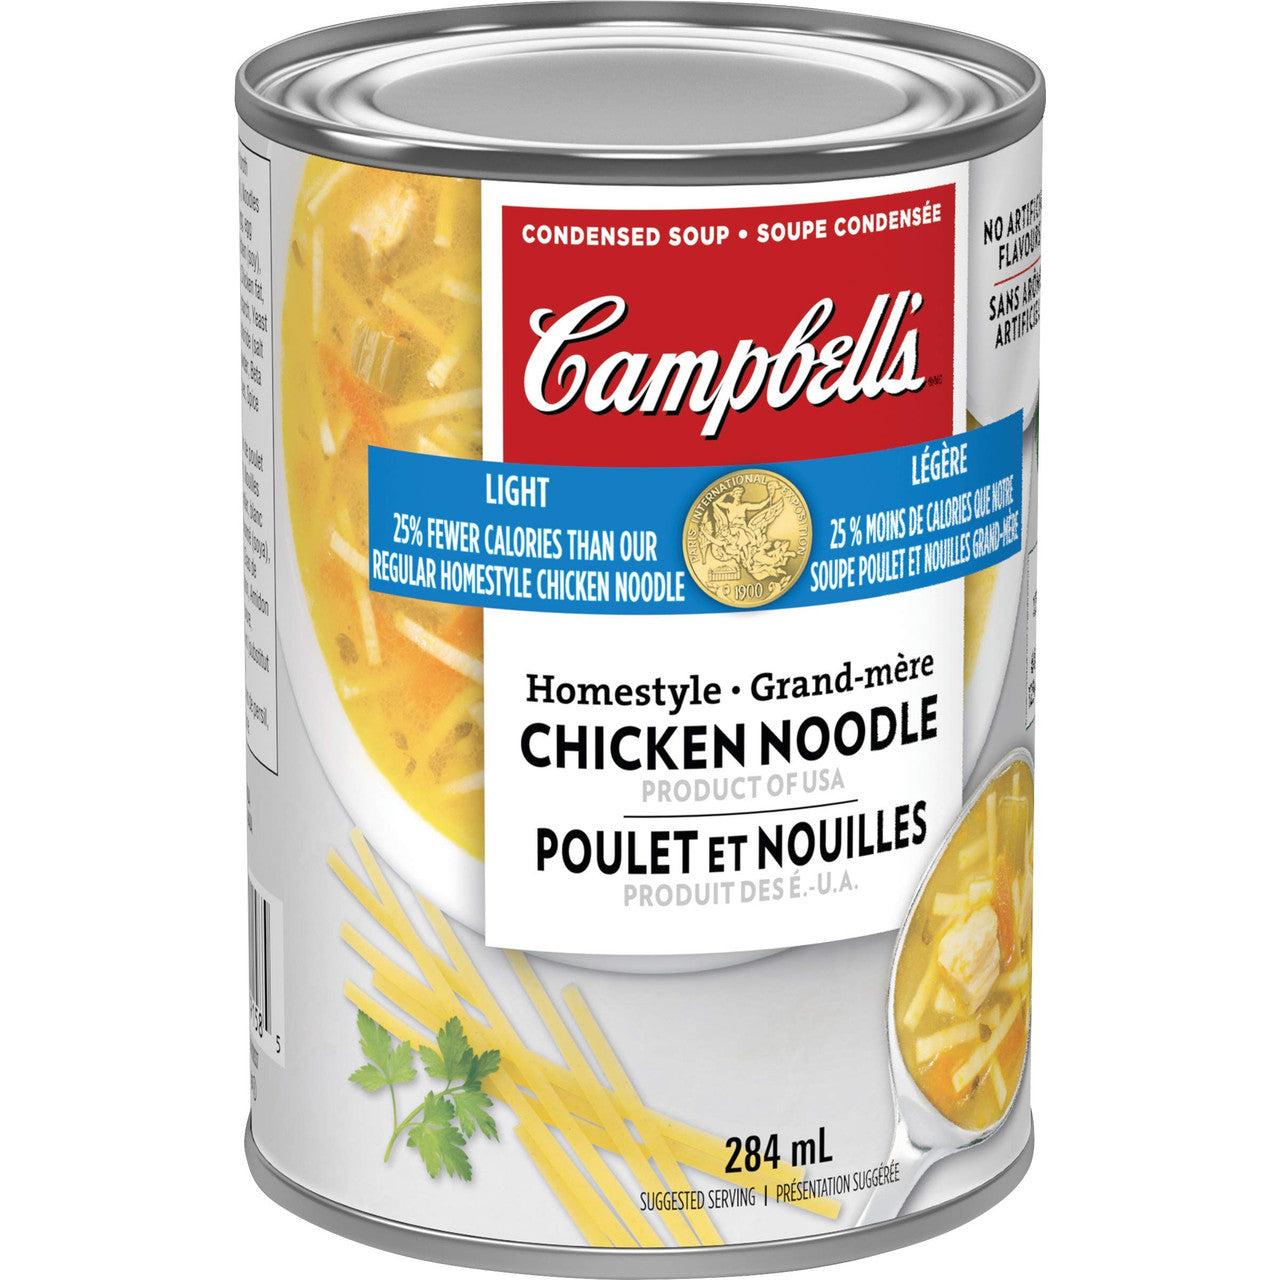 Campbell's Light Homestyle Chicken Noodle Soup, 284ml/9.6 oz. (Canadian)